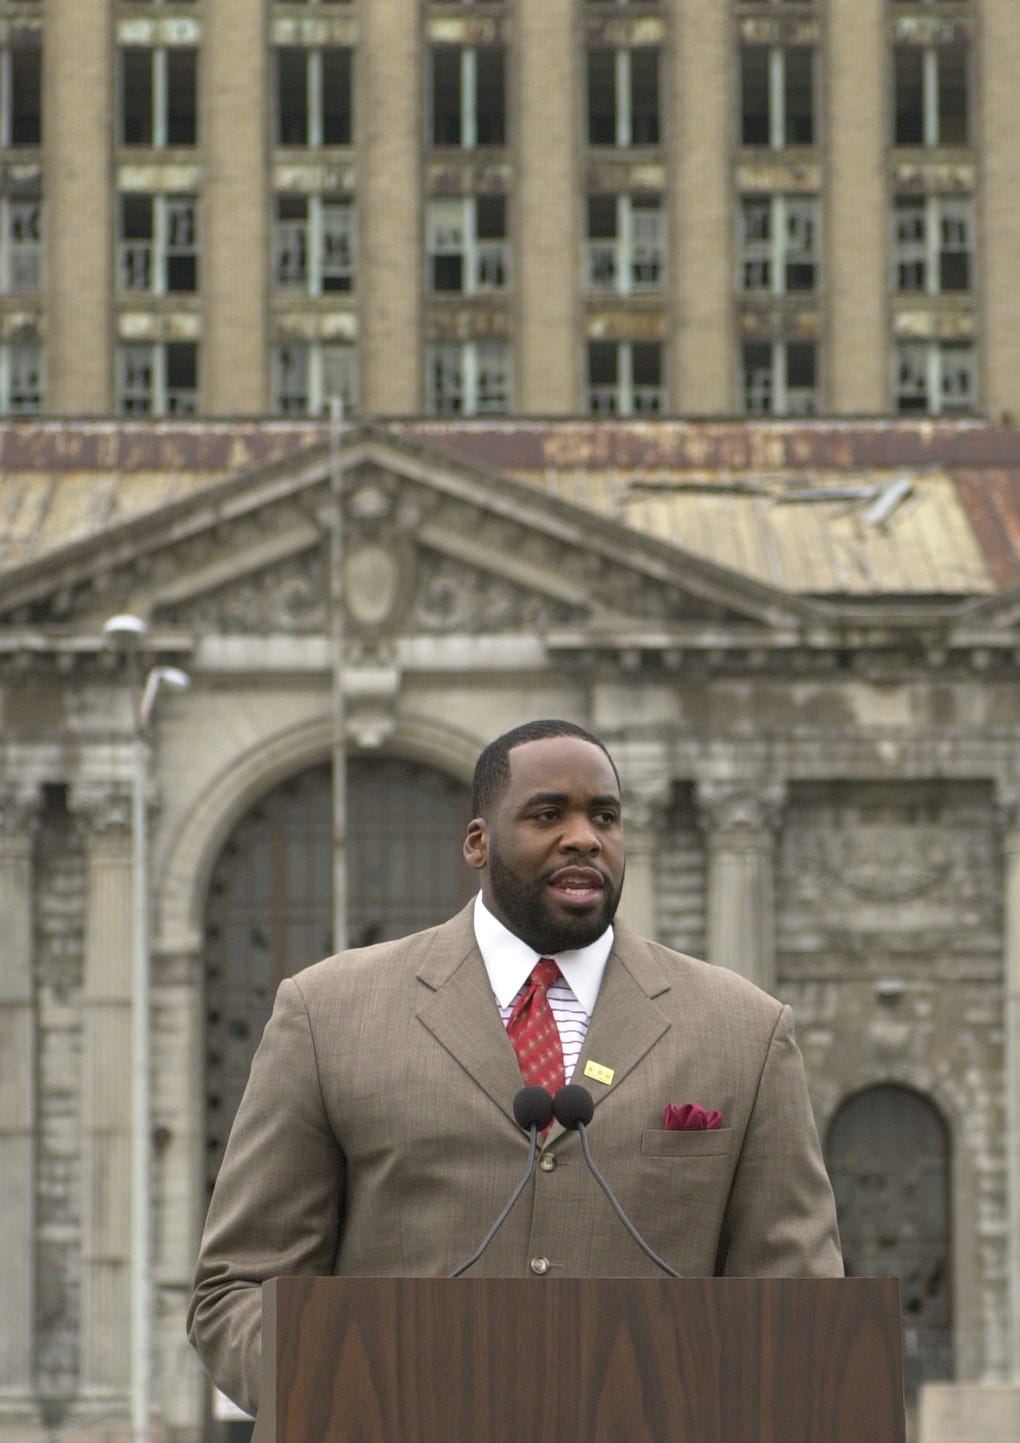 Mayor Kwame Kilpatrick at a March 3, 2004 press conference announces a proposal to move the city's police headquarters to Michigan Central Depot.